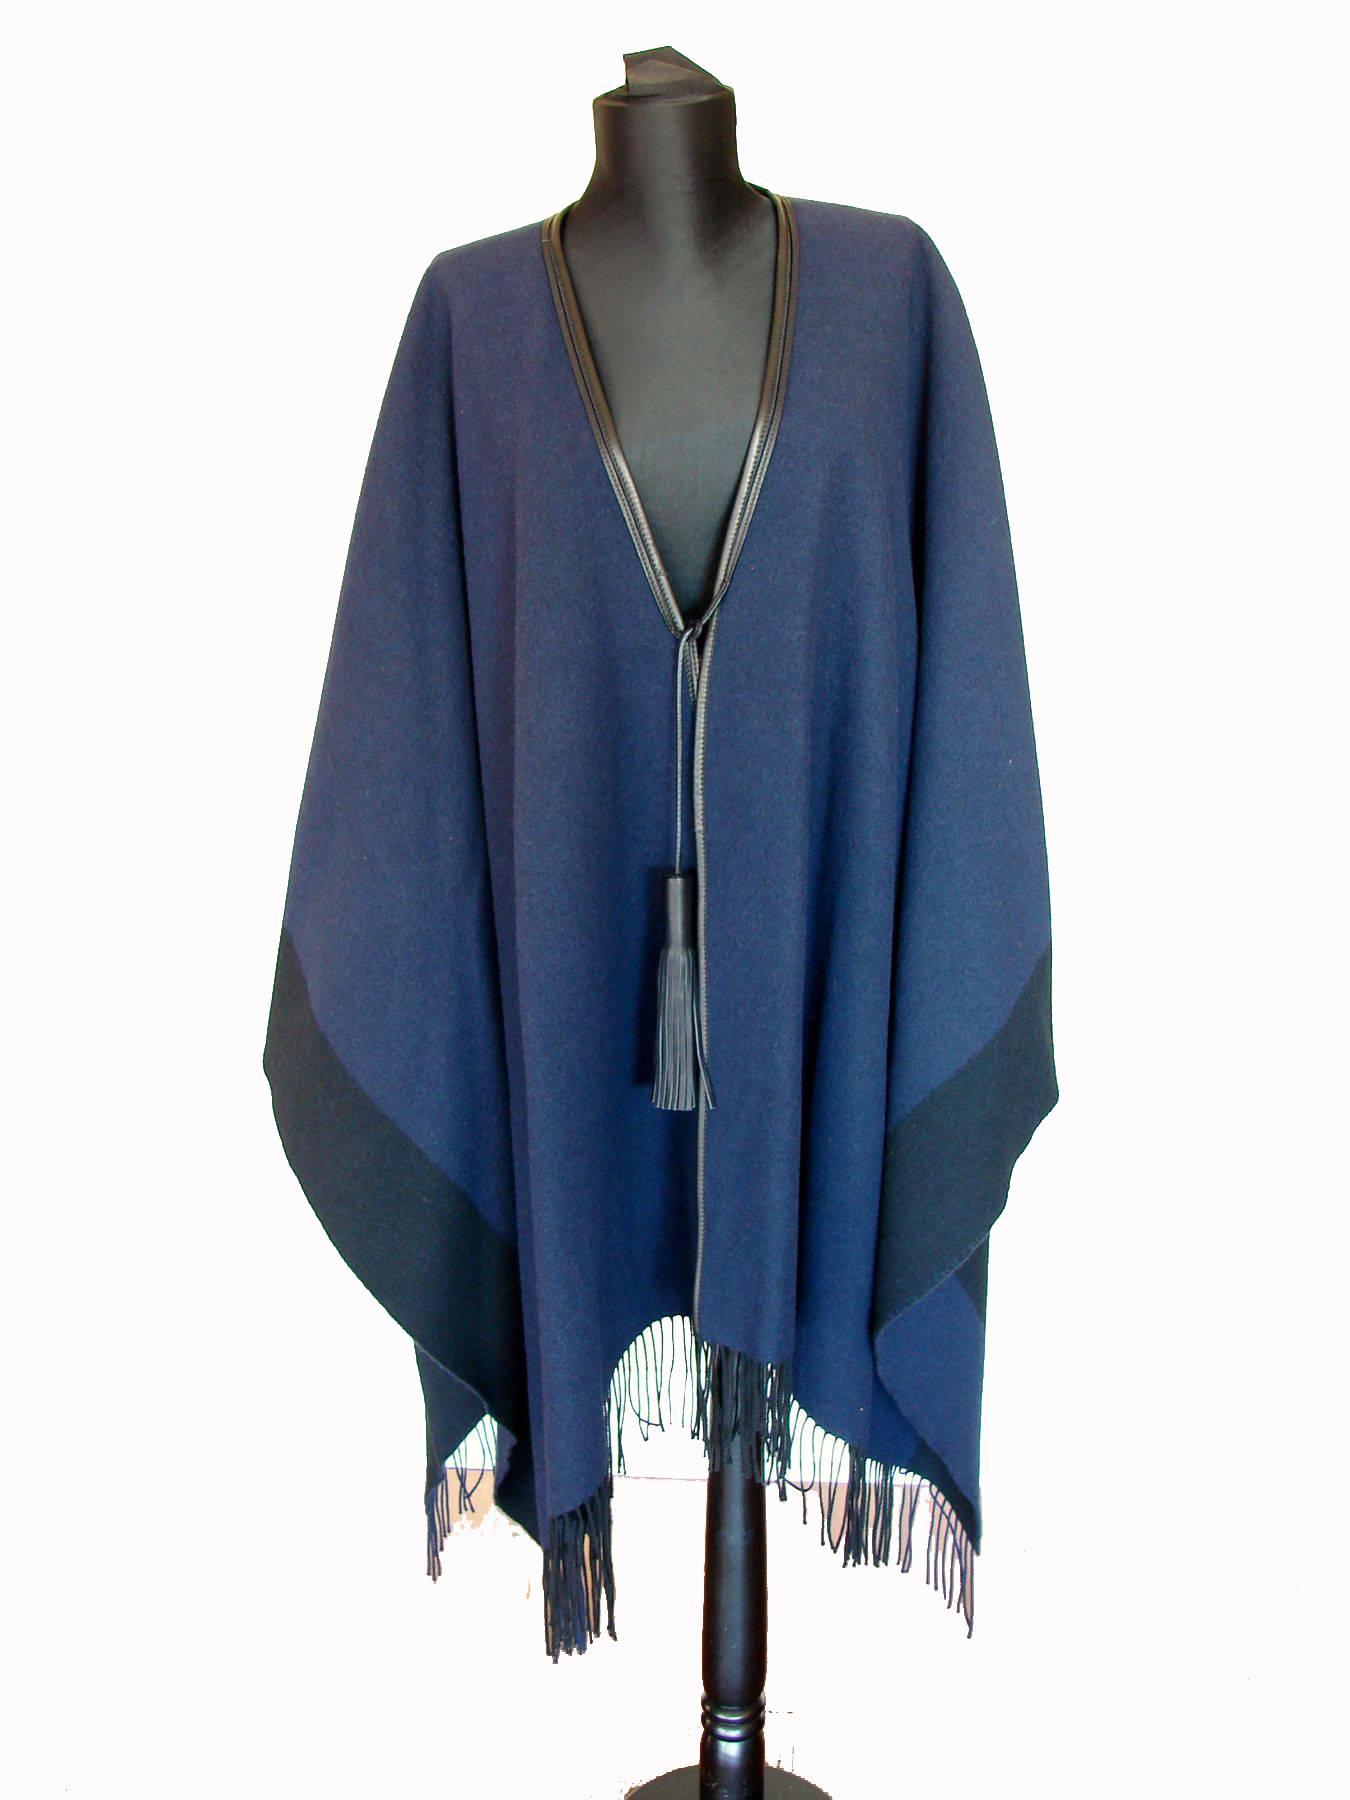 Wool & cashmere blend color block poncho or cape from HERMES is trimmed in black leather and features two leather tassels.  Hem features wool & cashmere fringe. One Size Fits Most, it measures appx 62